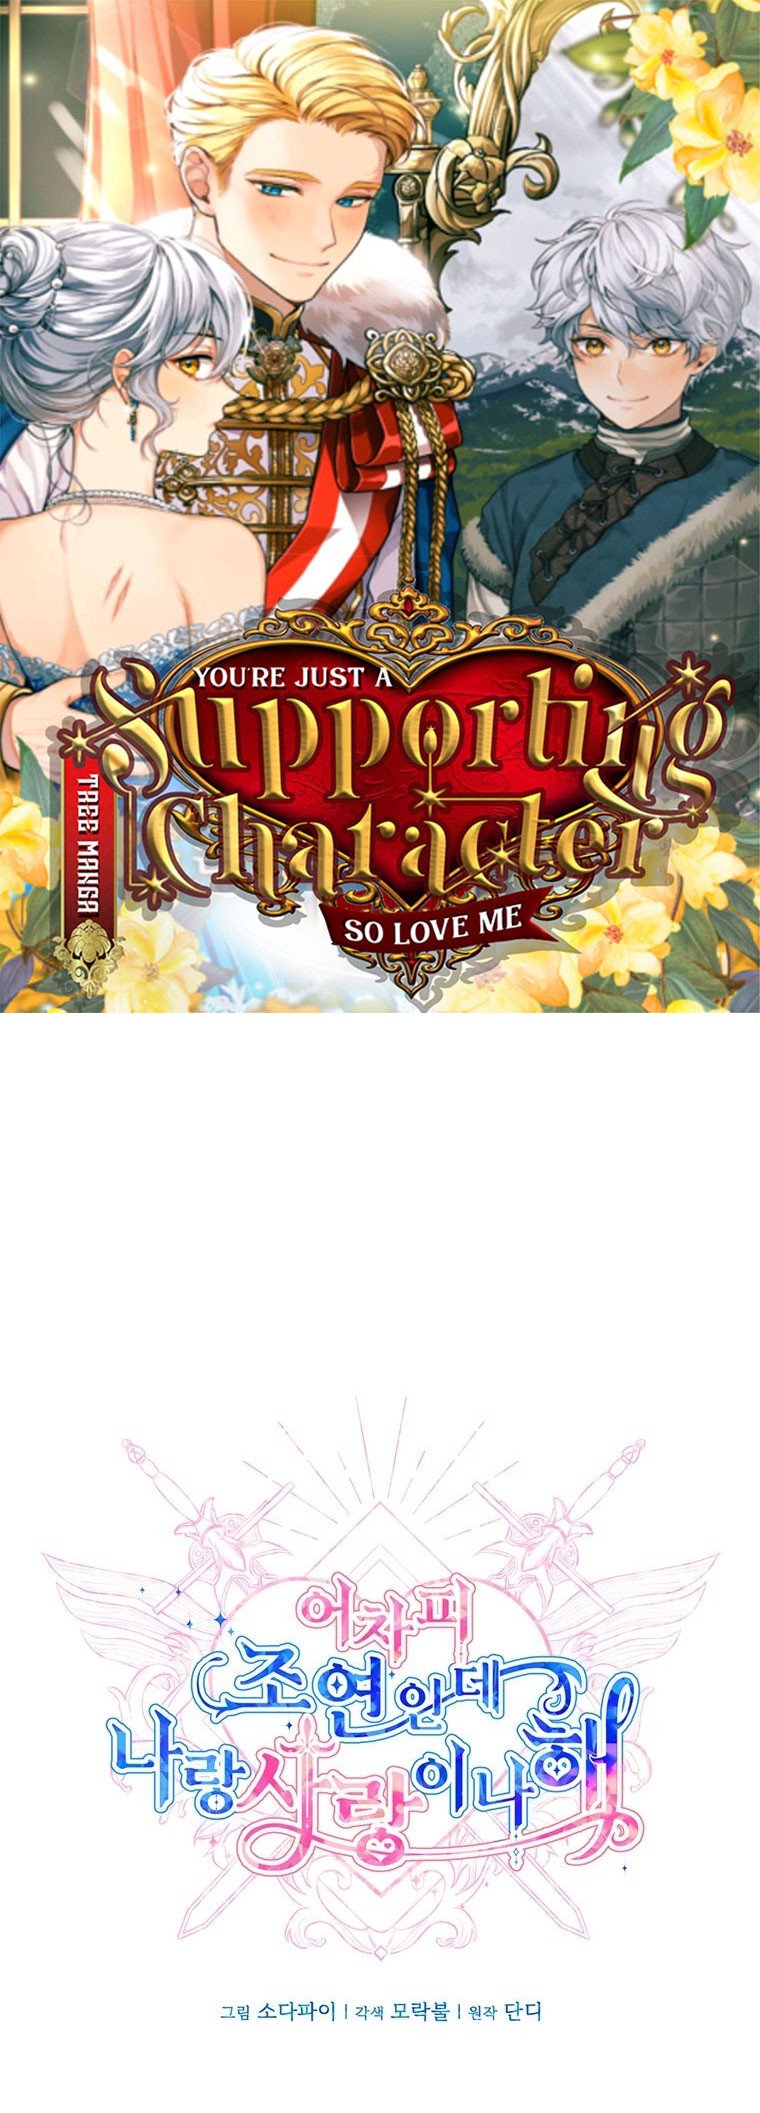 You’re just a supporting character, so love me! chapter 5